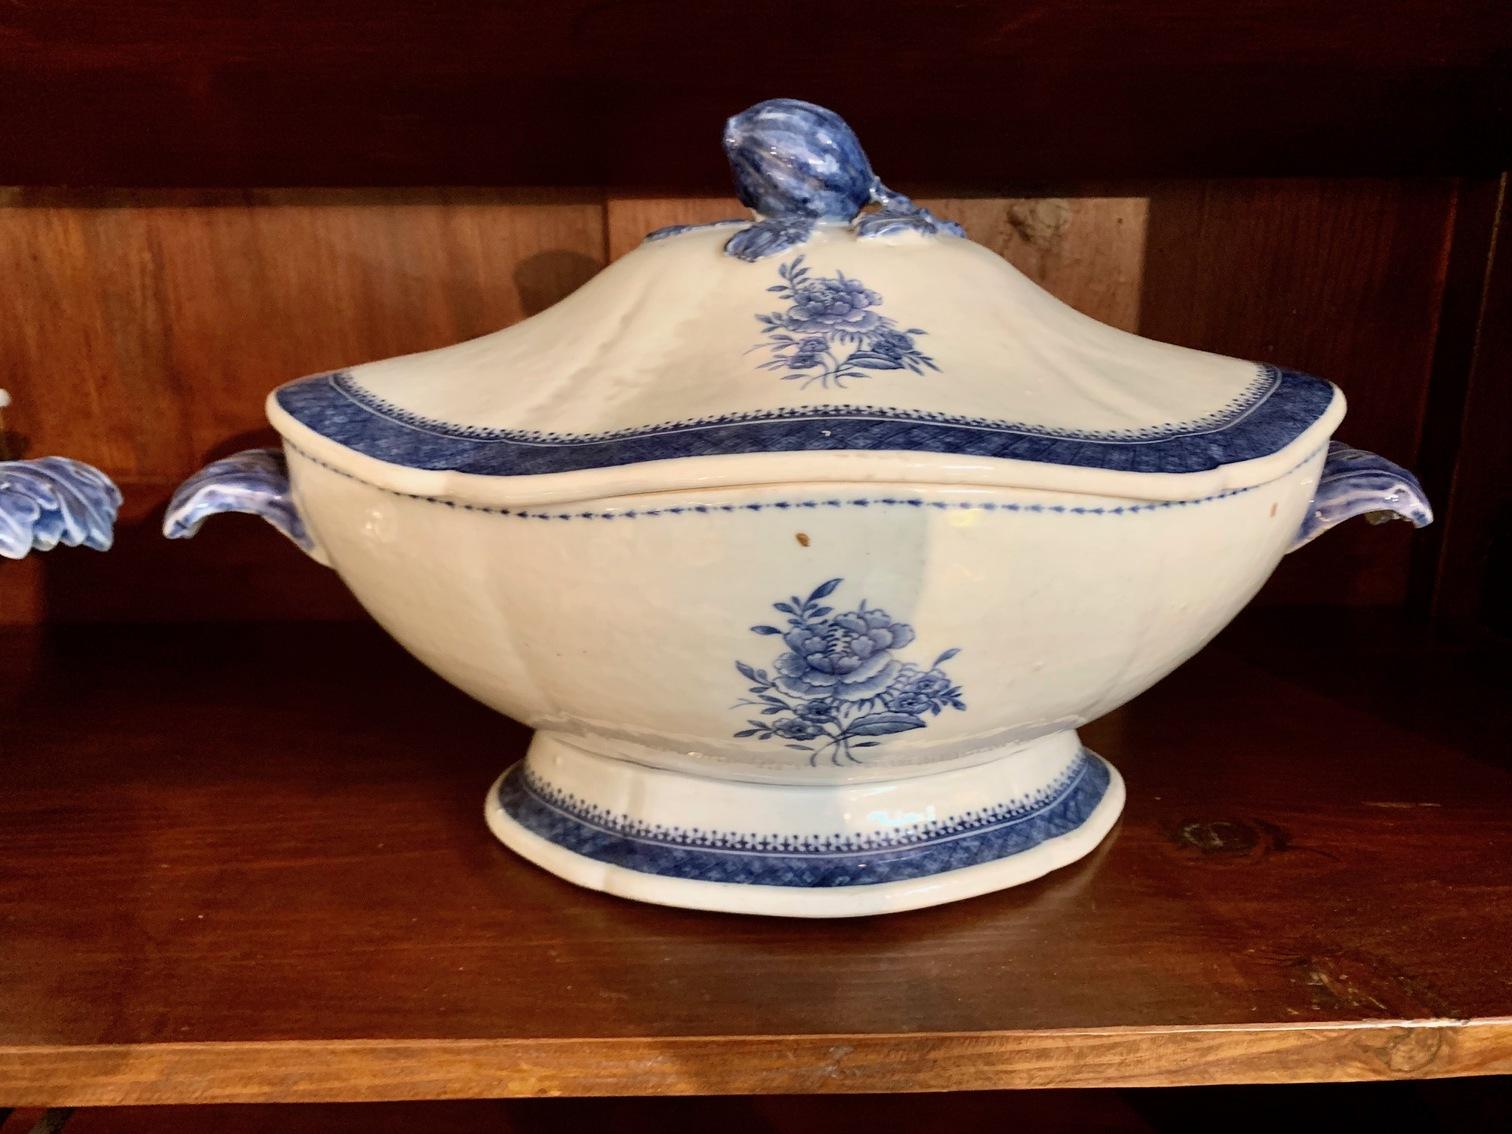 Pair of blue and white porcelain tureens for export, China, Qing dynasty, Qianlong Jiaqing period, end of the 18th century, beginning of the 19th century, one of the tureens has a small mark on the lid.